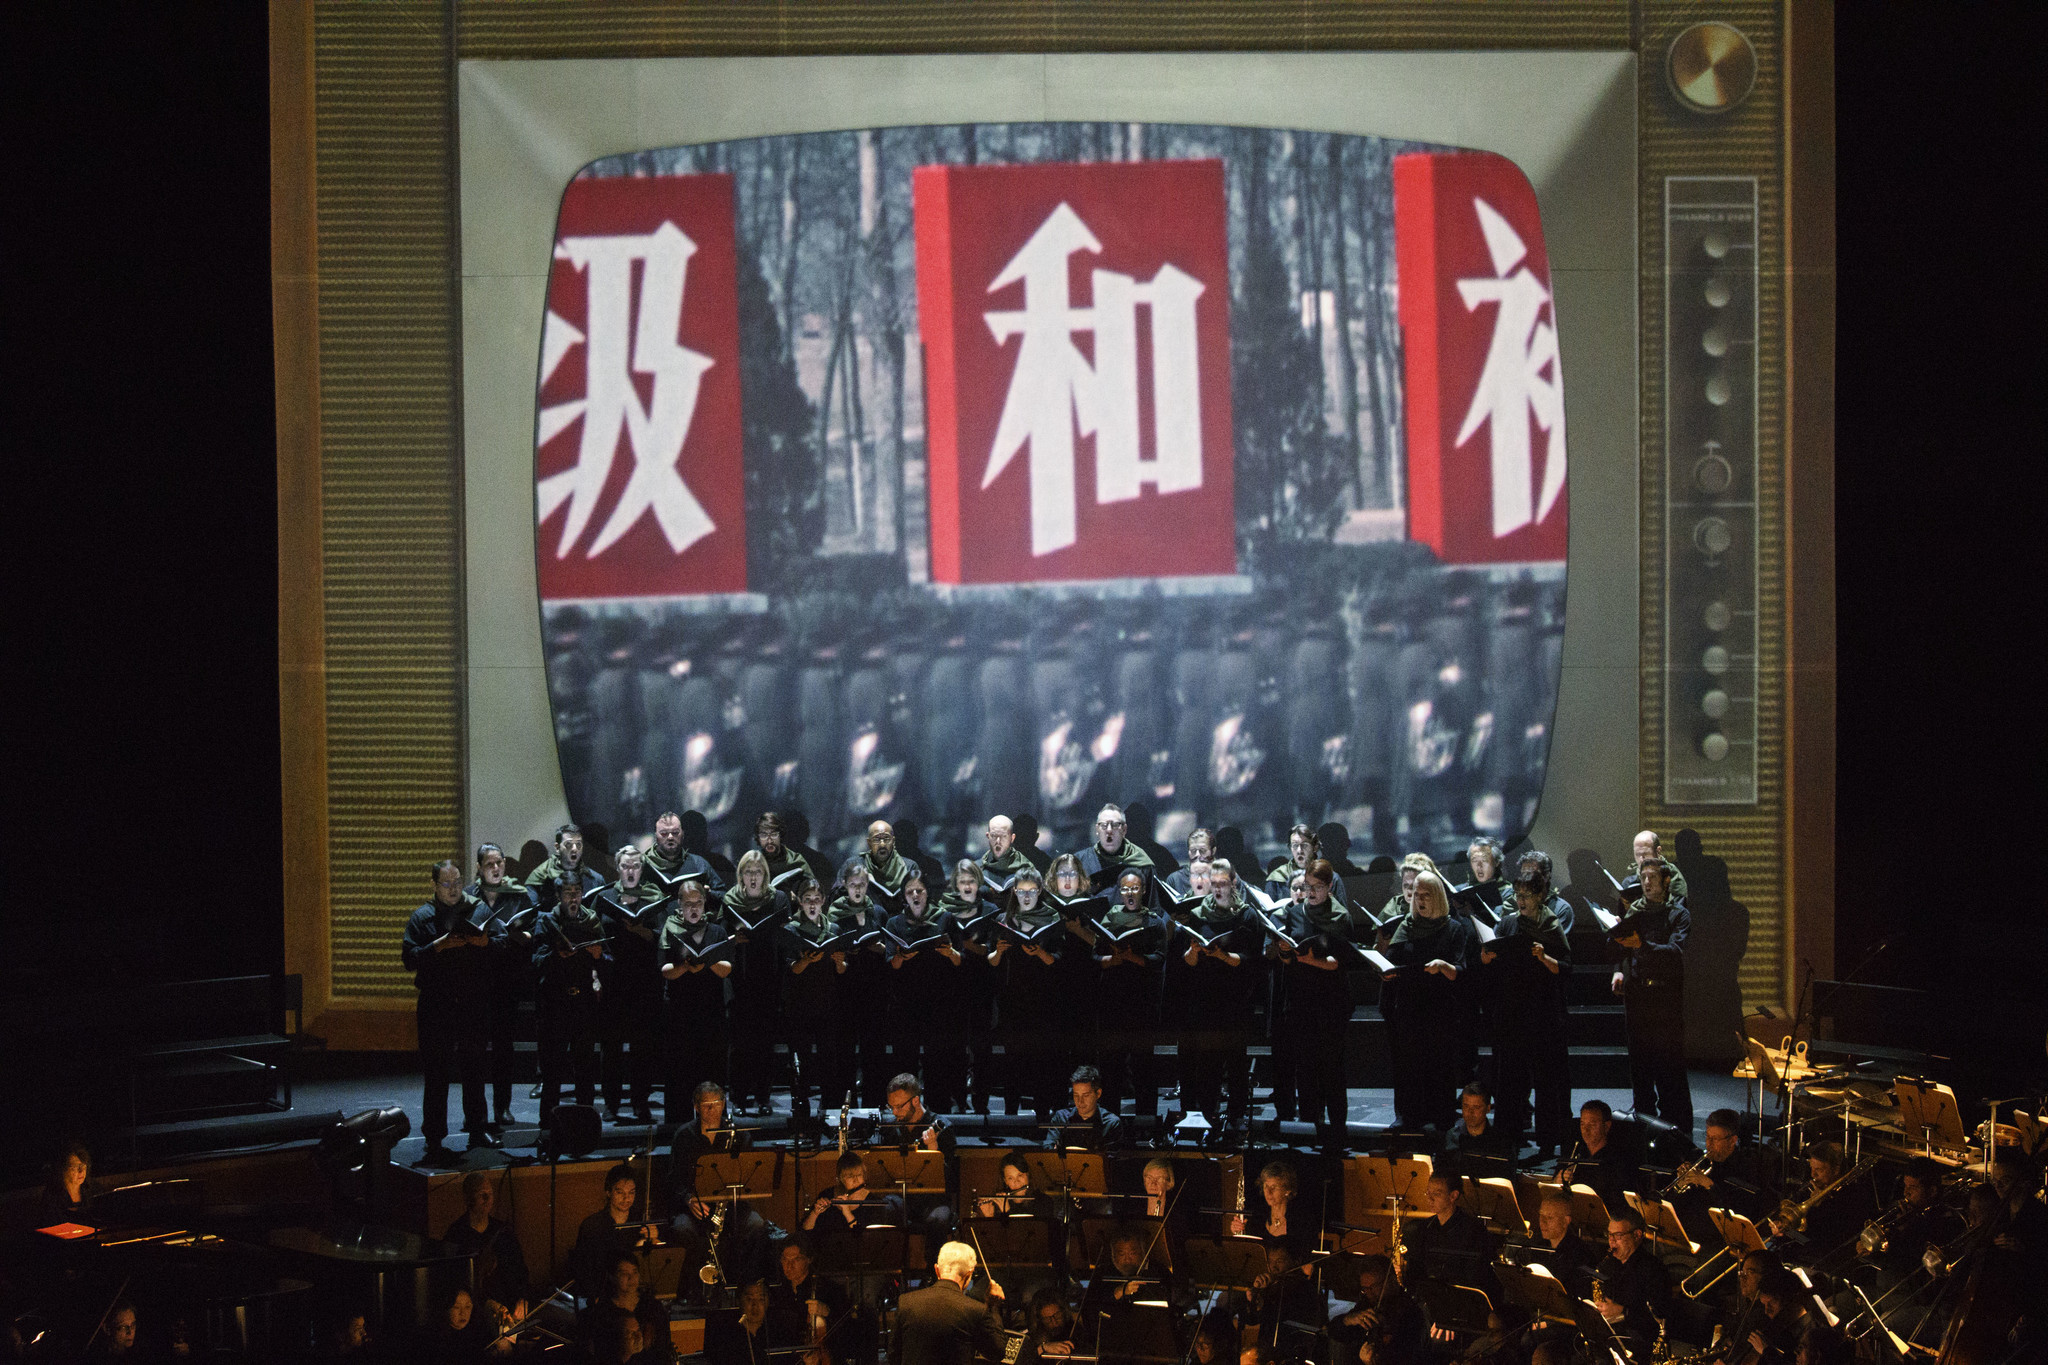 The L.A. Phil performs with the Los Angeles Master Chorale on the Disney Hall stage, backed by a projection screen made to look like a vintage TV playing historical footage during "Nixon in China."